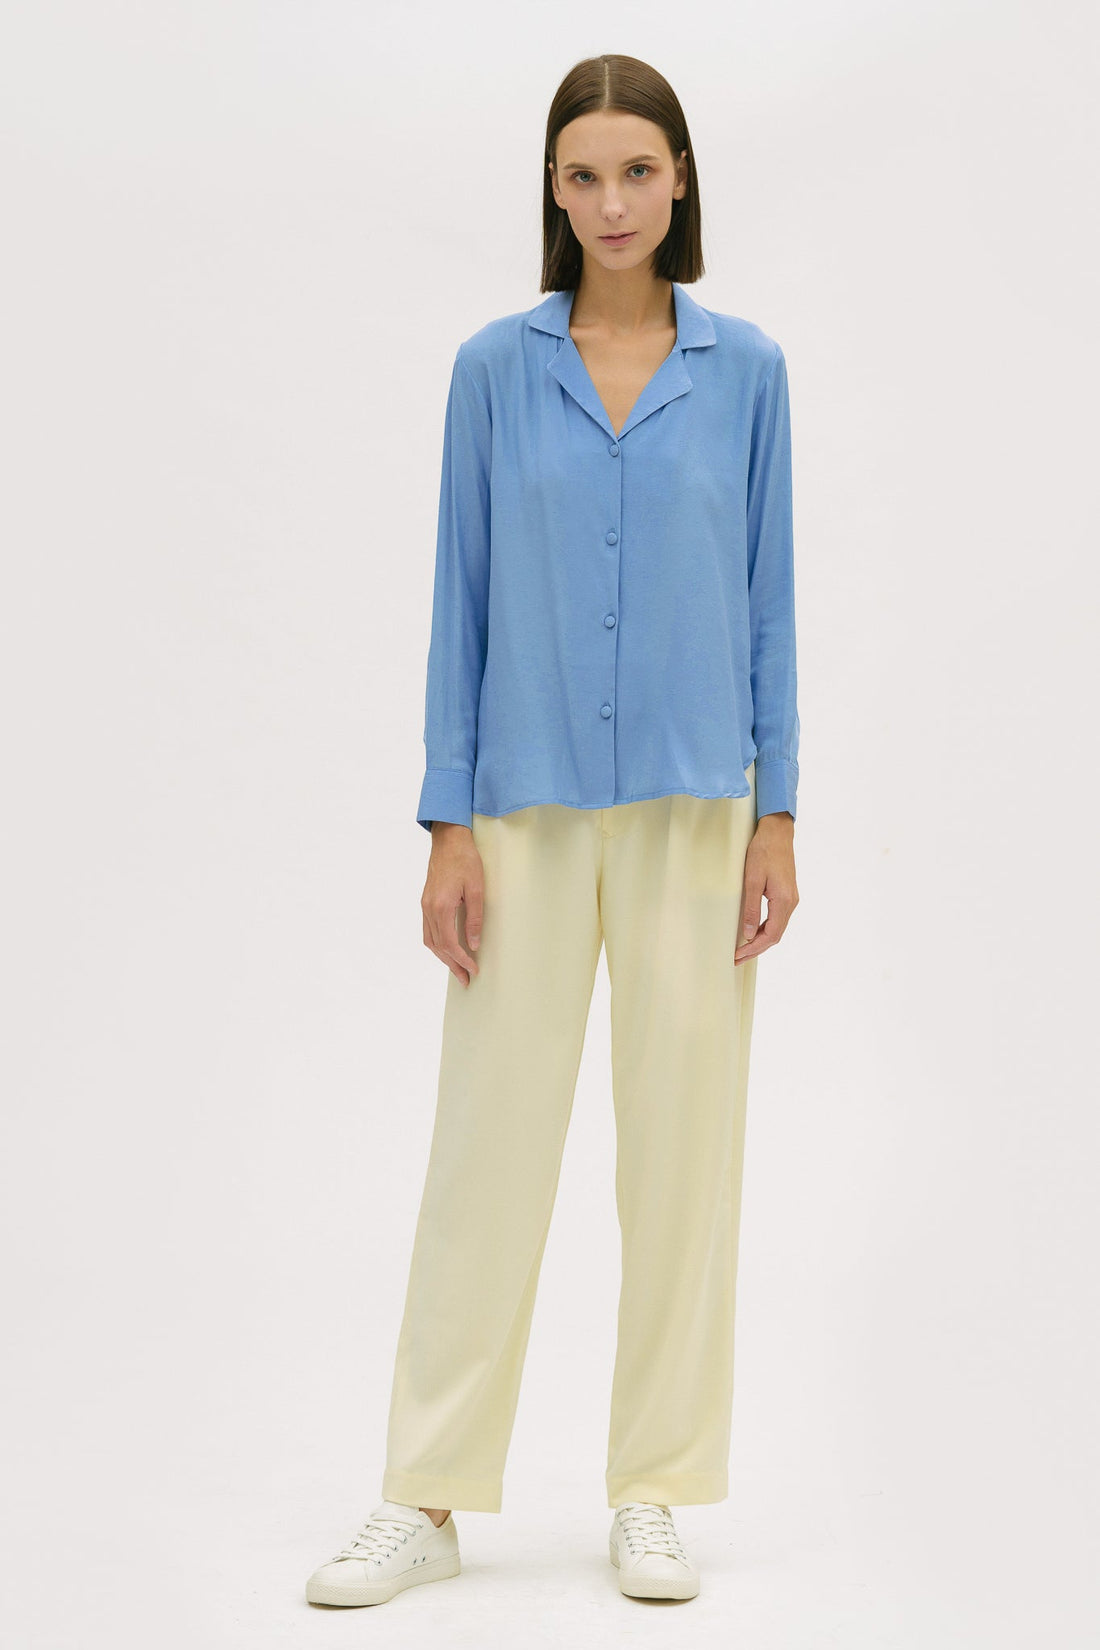 A woman is wearing a blue shirt and yellow trousers.